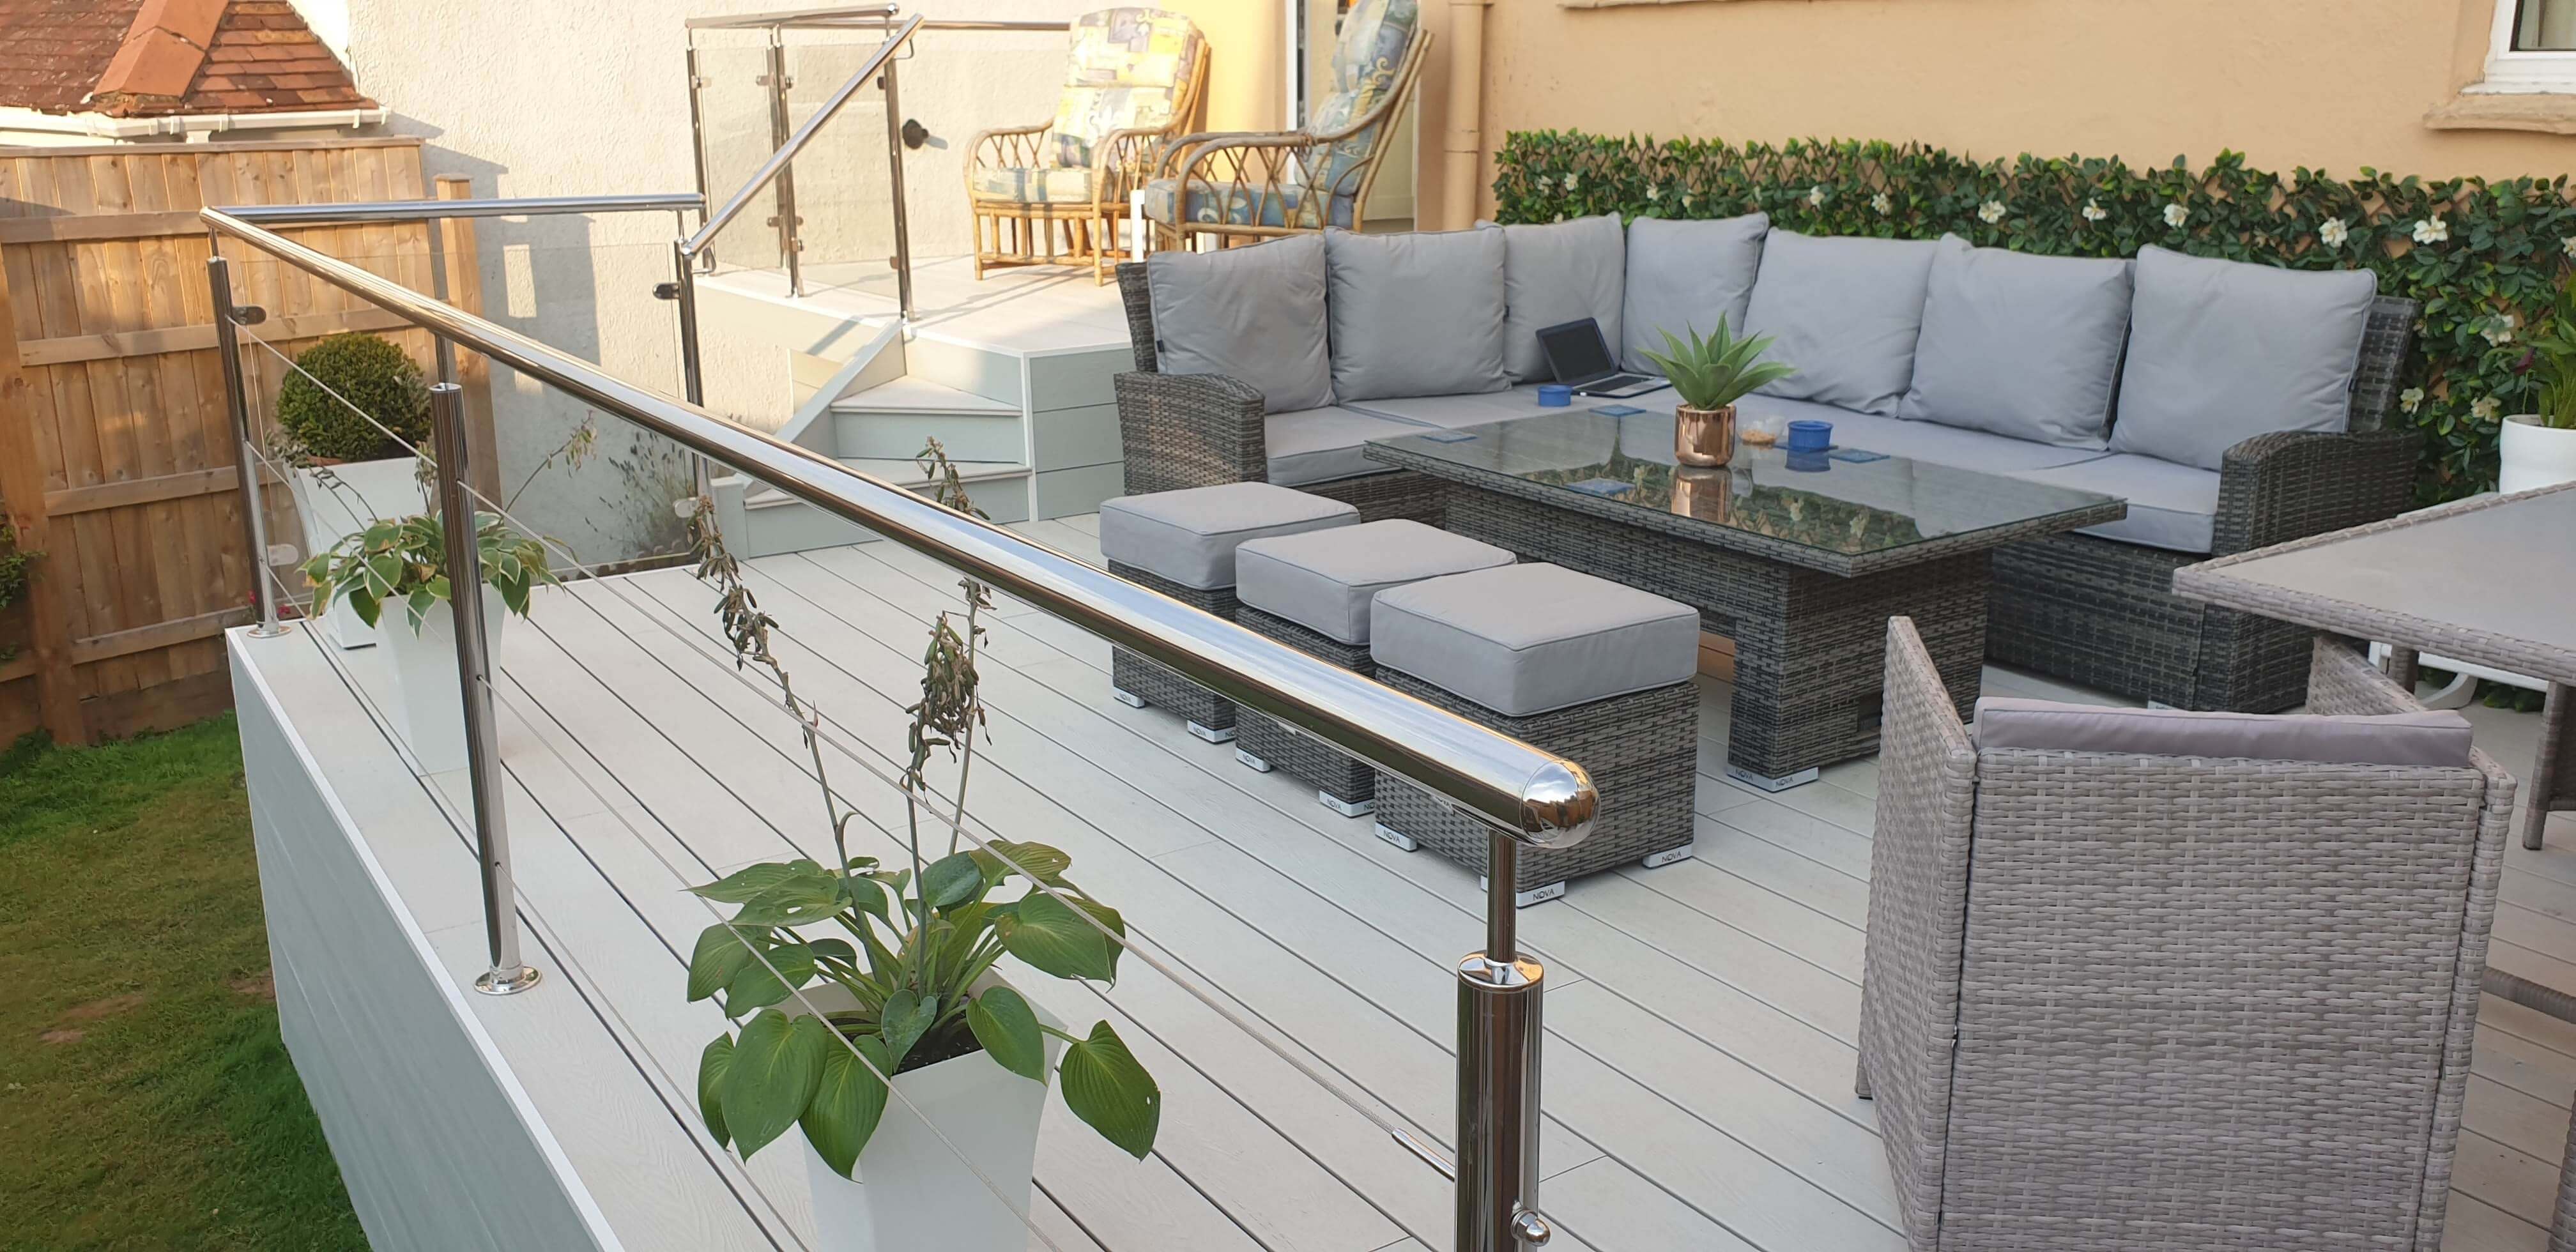 Cladco Composite Original Hollow Decking boards in Ivory